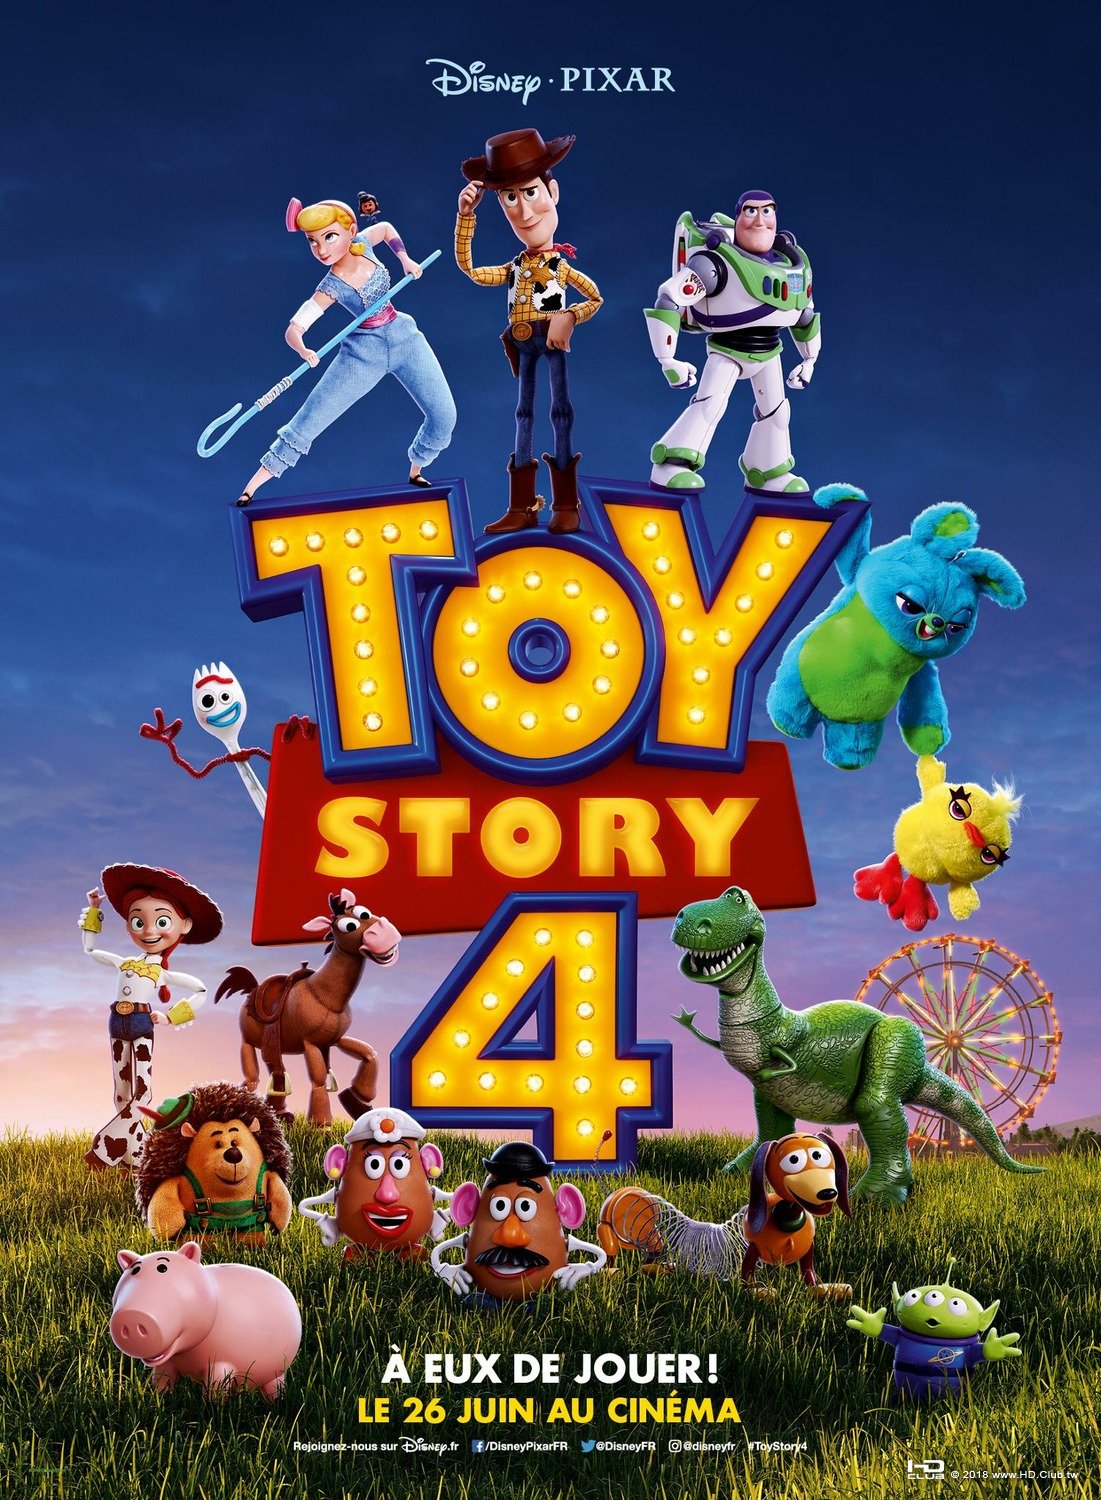 toy_story_four_ver7_xlg.jpg